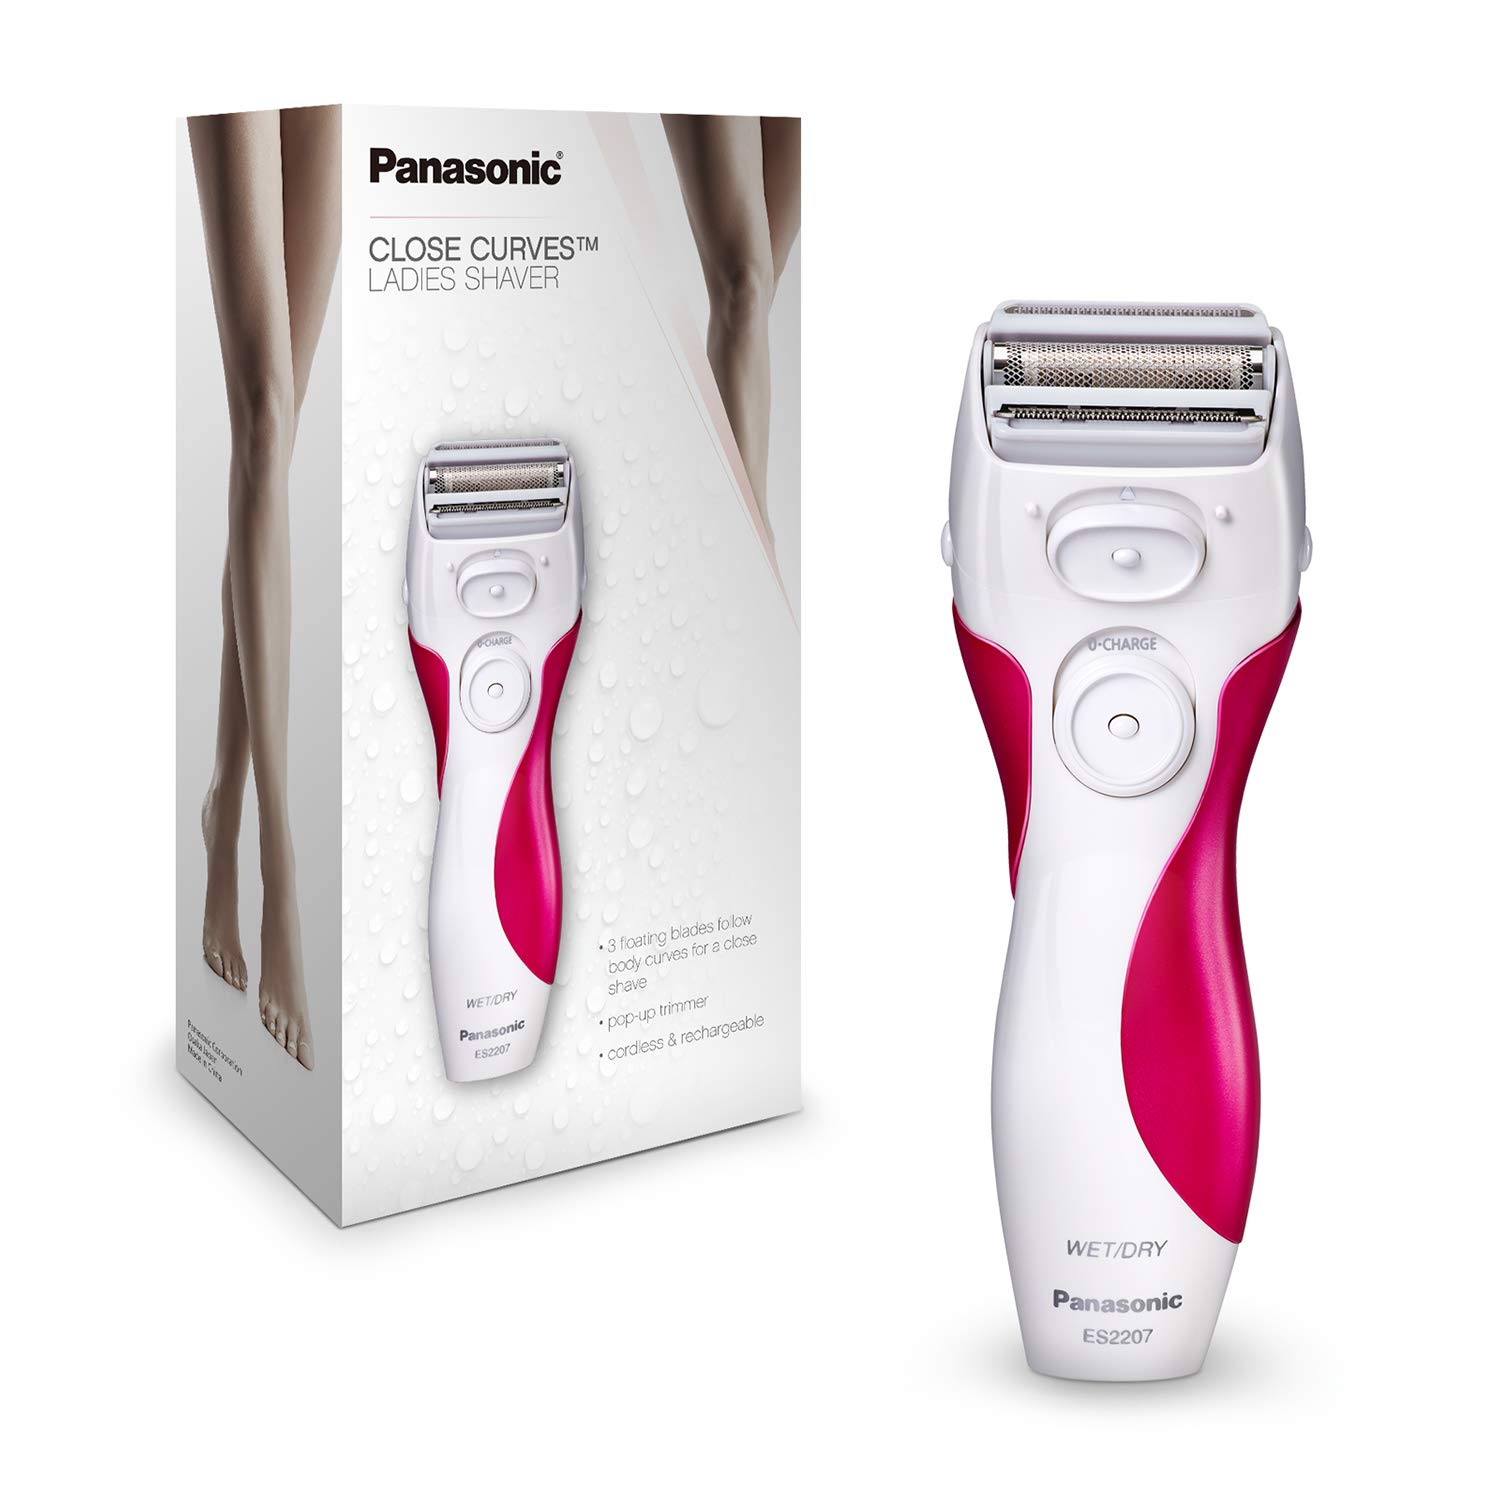 Panasonic ES2207P Ladies Electric Shaver, 3-Blade Cordless Women’s Electric Razor with Pop-Up Trimmer, Use Wet or Dry - image 2 of 5